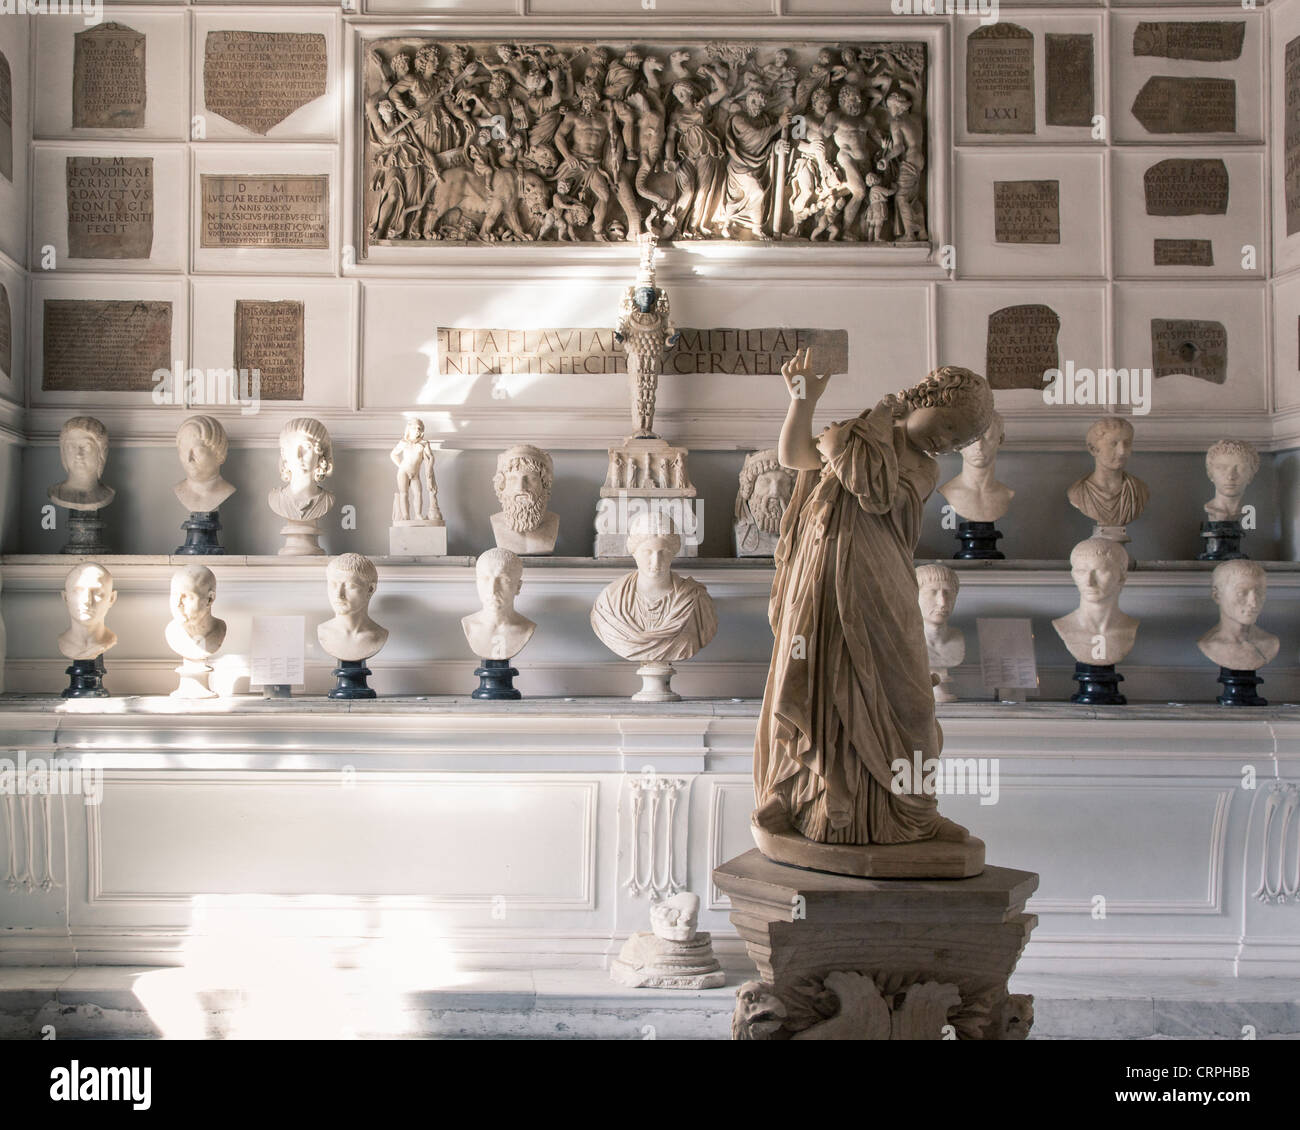 Roman and Etruscan antiquities inside the Capitoline Museum Stock Photo